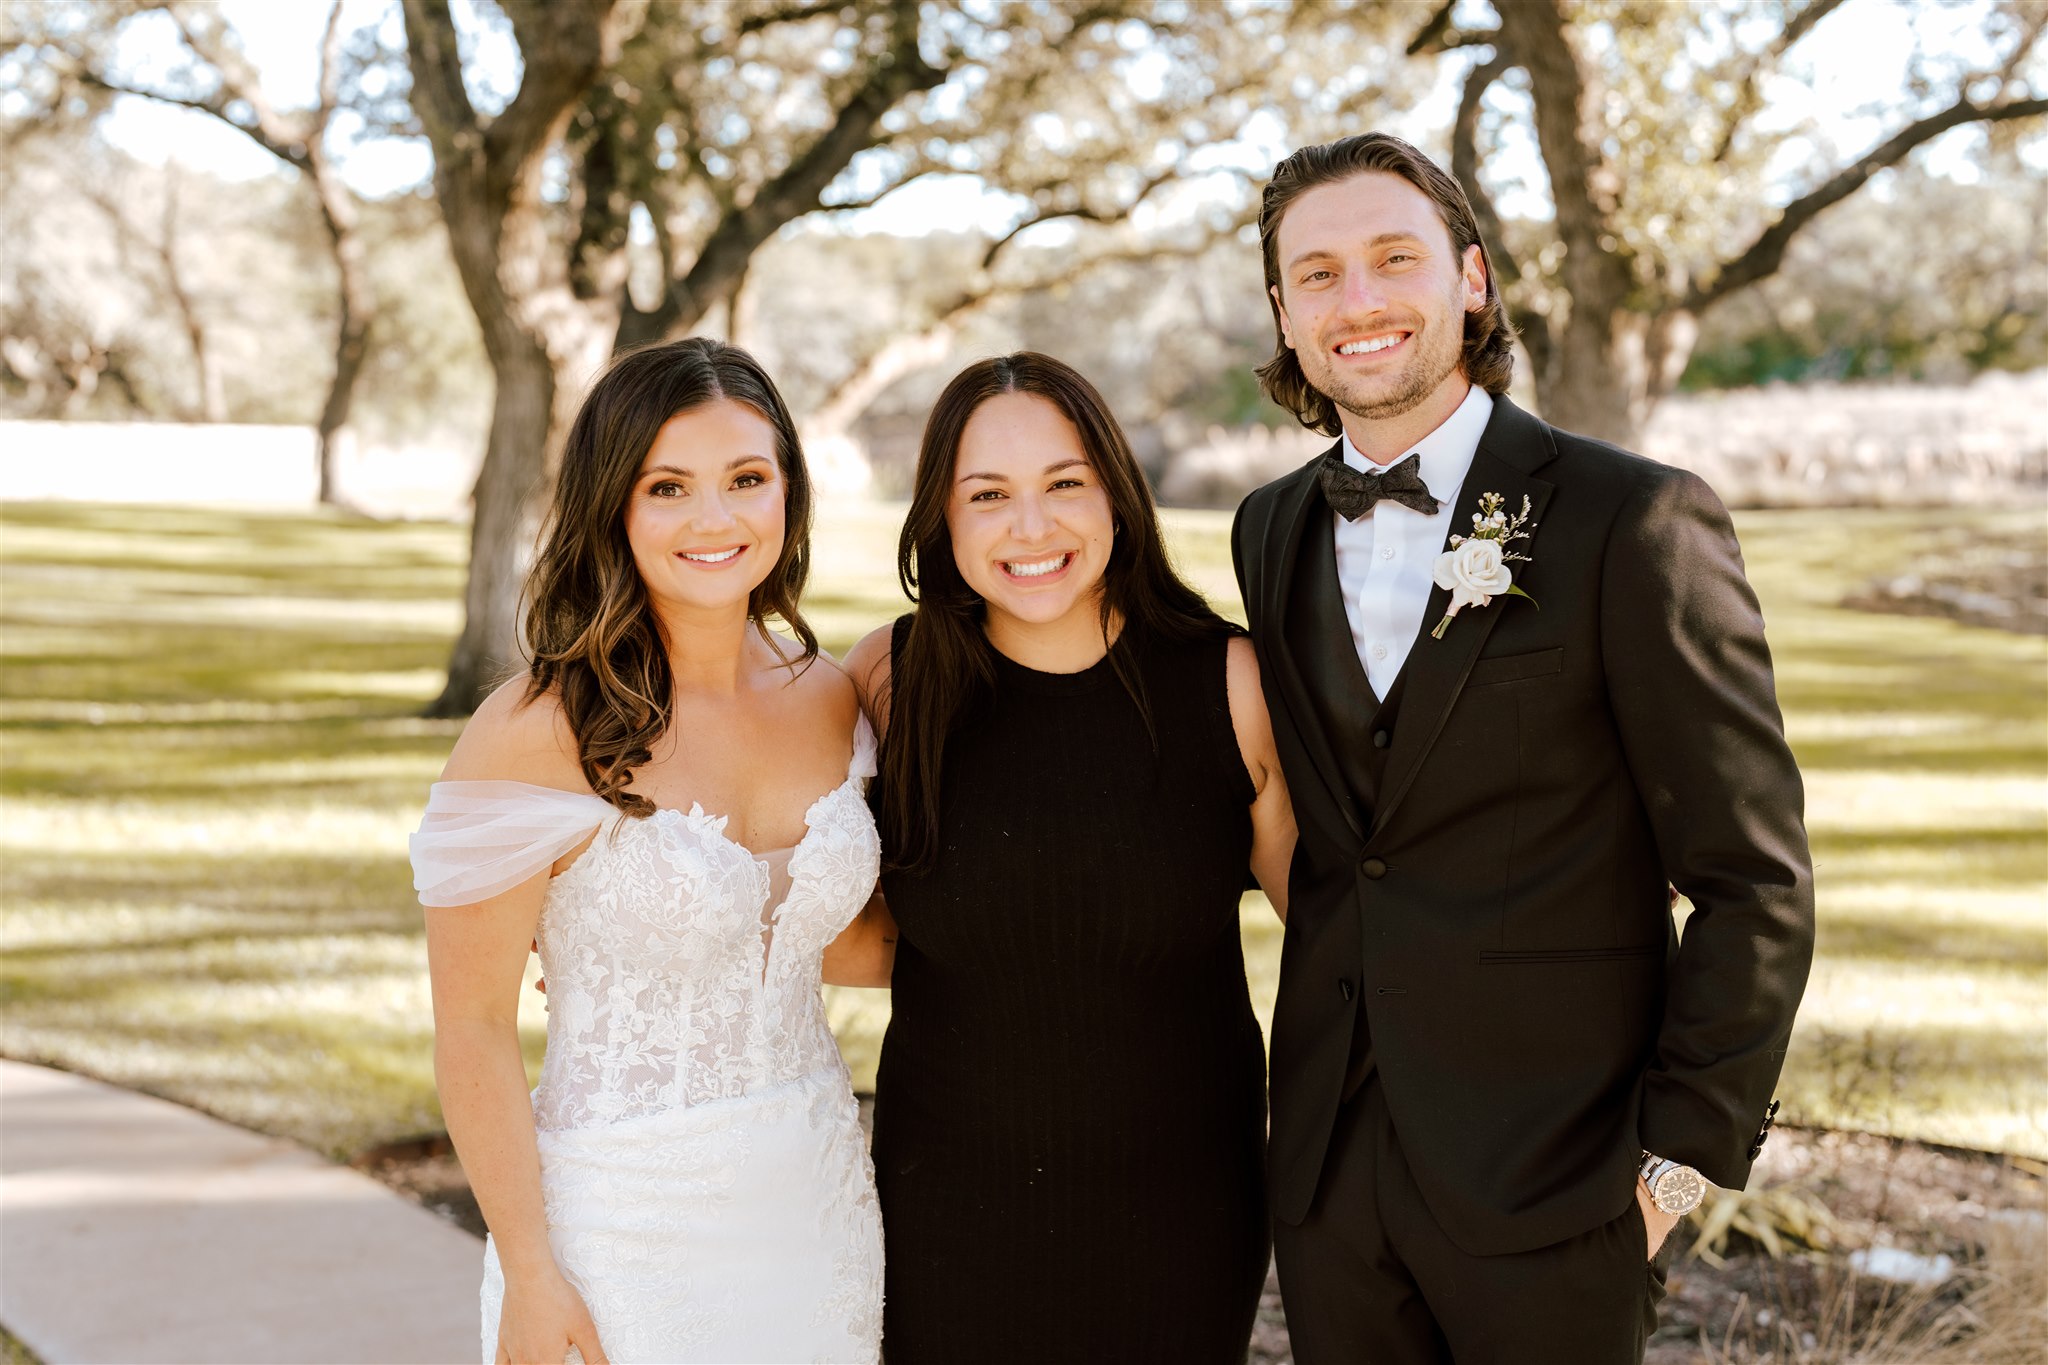 Wedding planner smiling with bride and groom